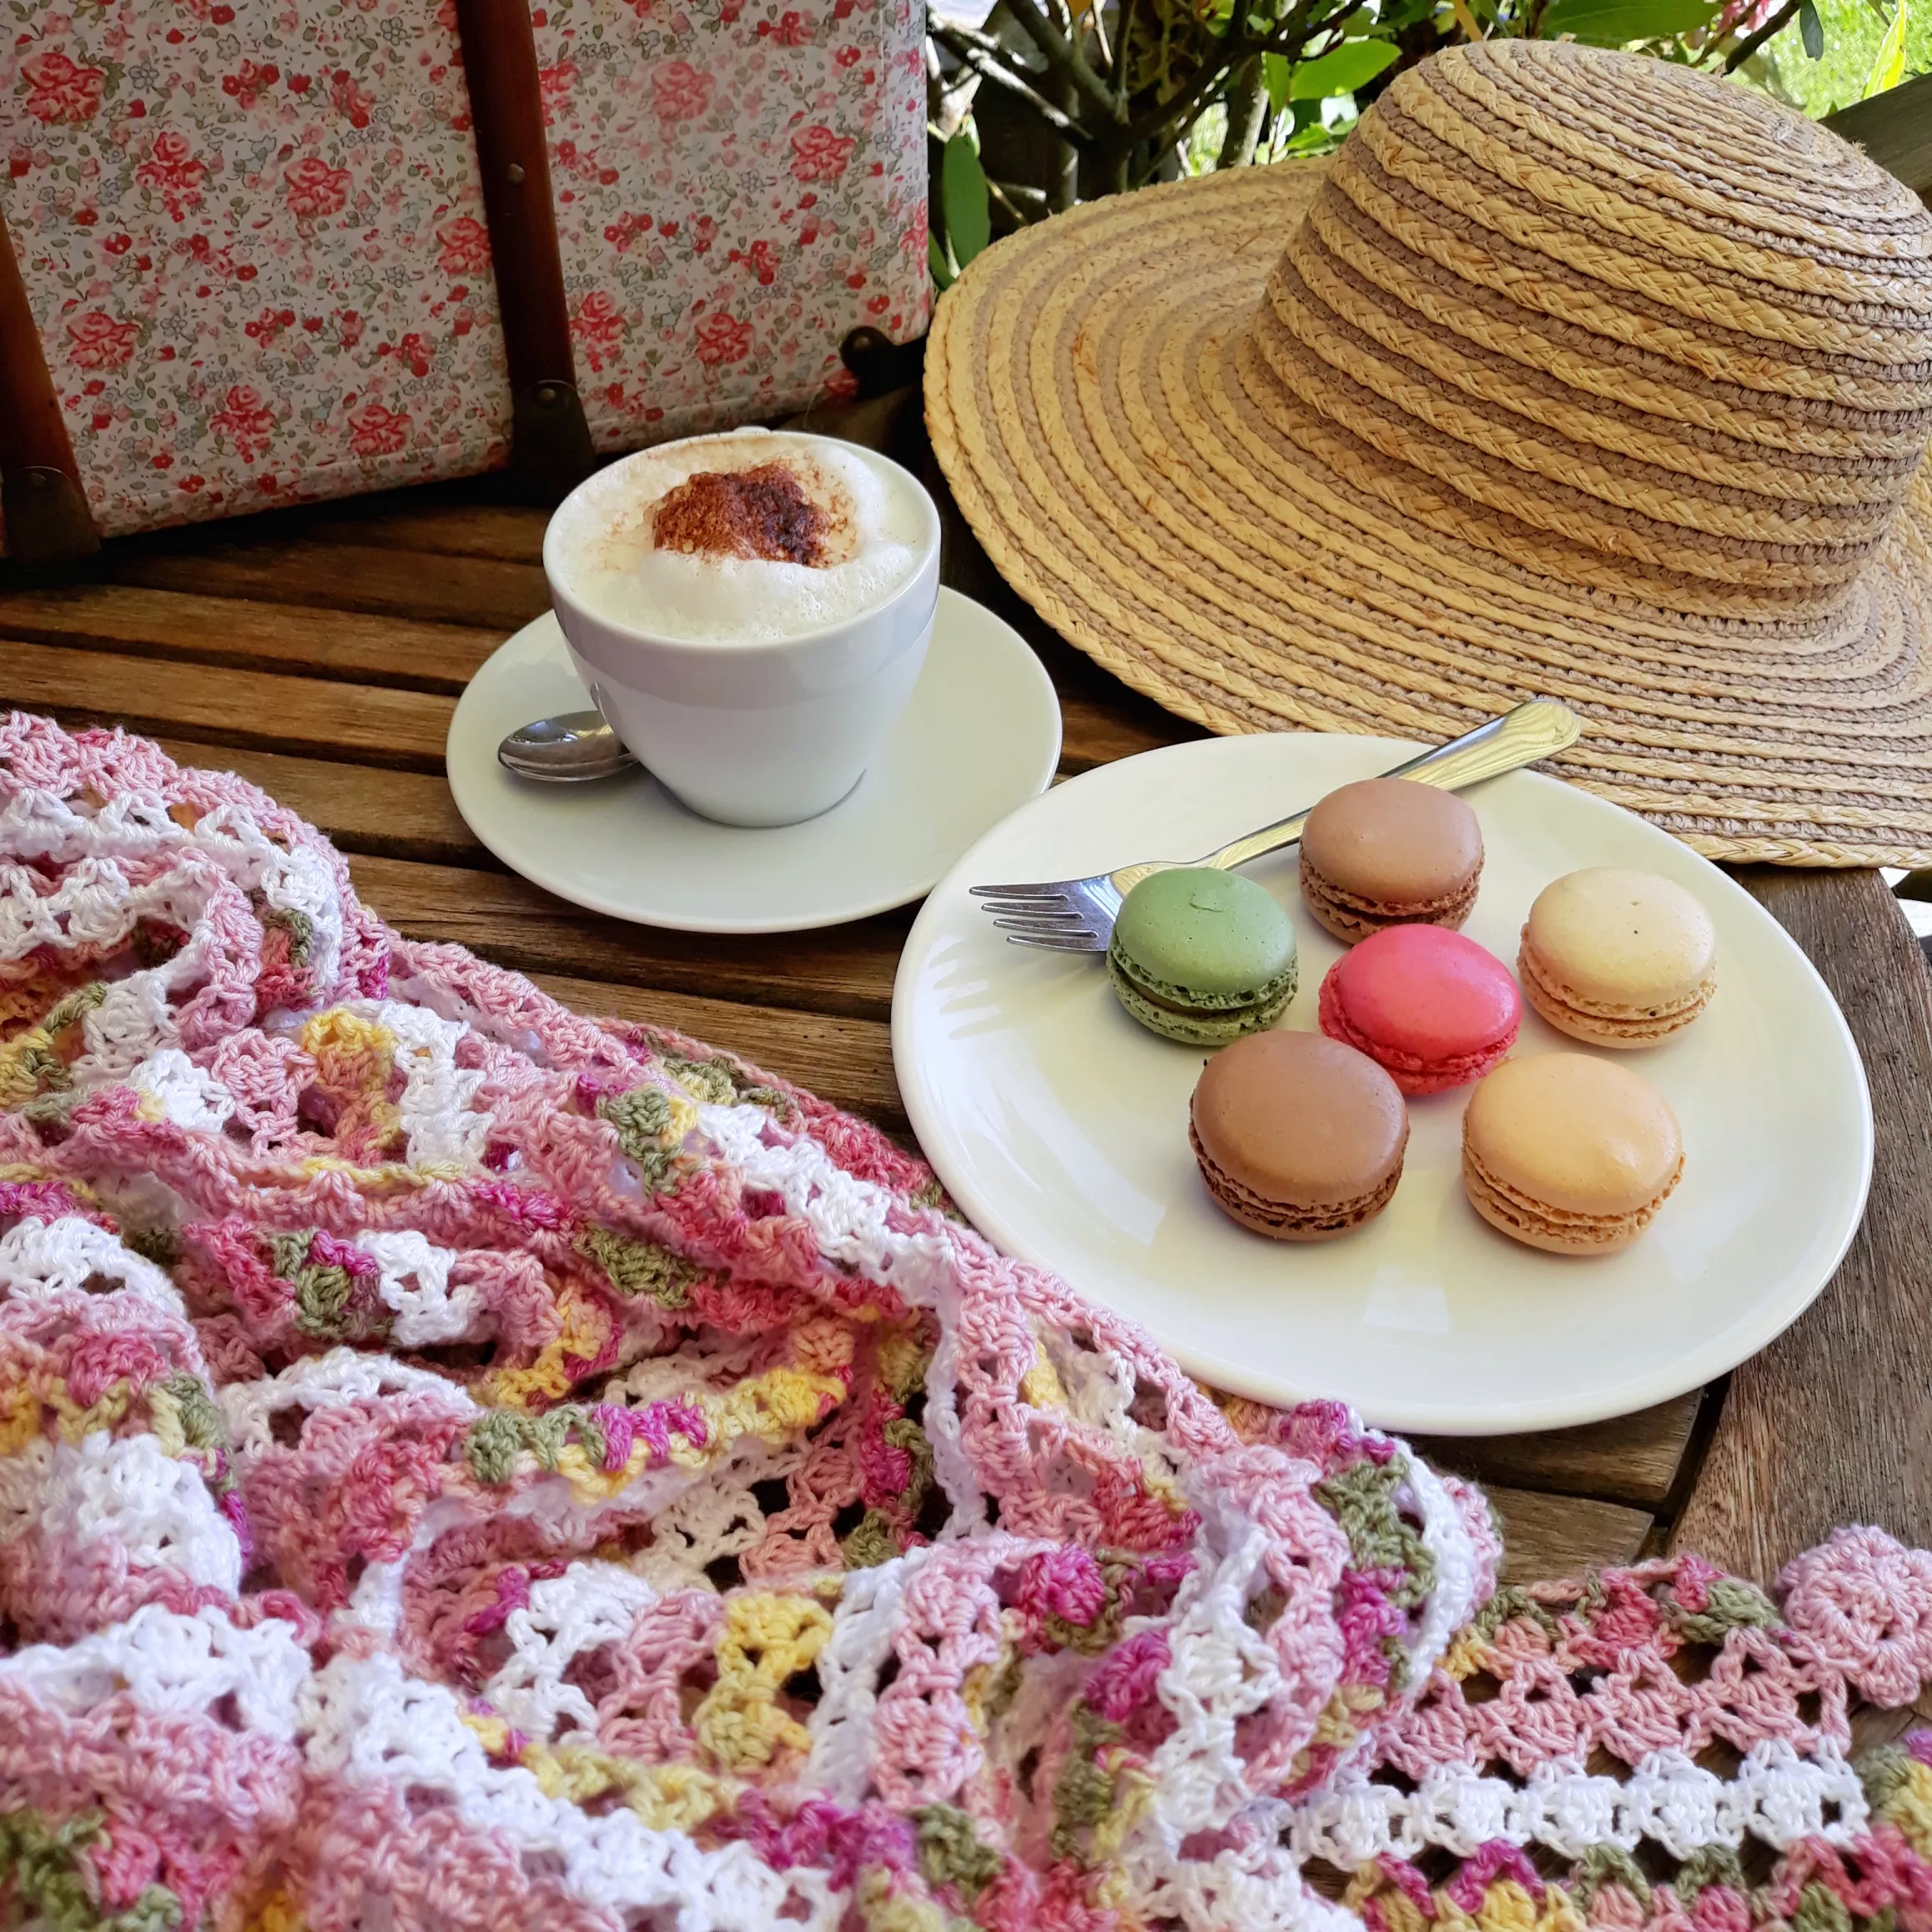 Join the Tea Party with delicious macarons.